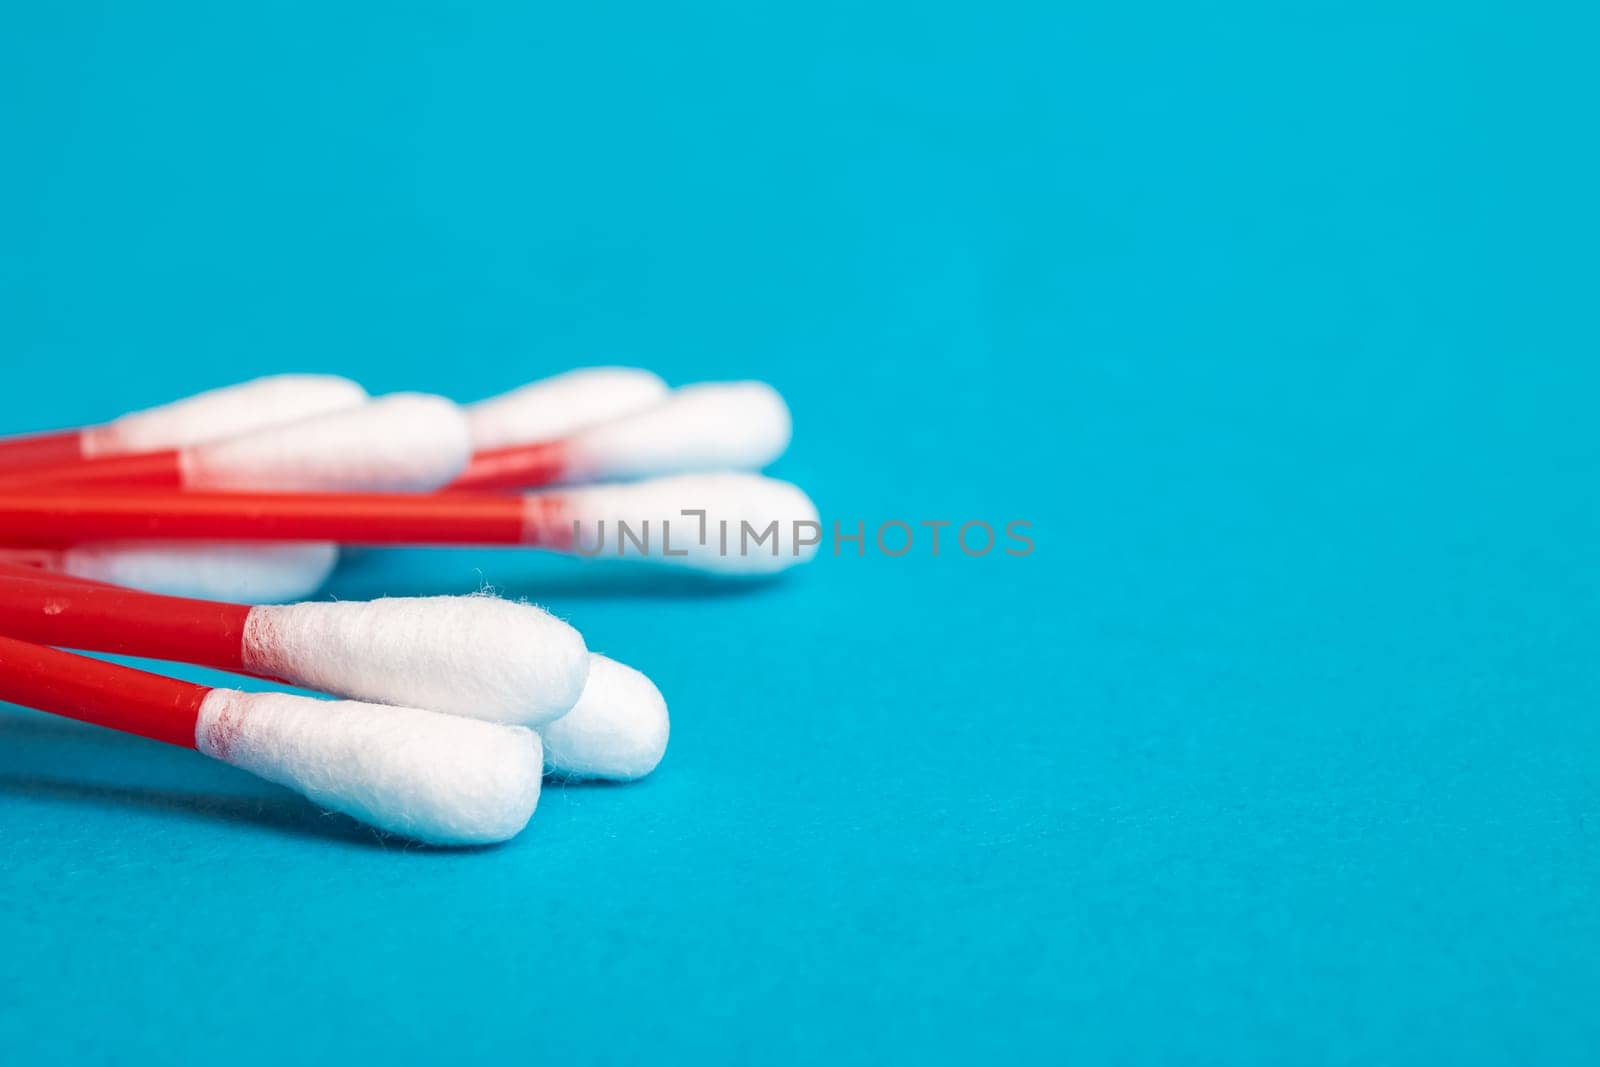 A pile of red cotton buds on a blue background close up, copy space